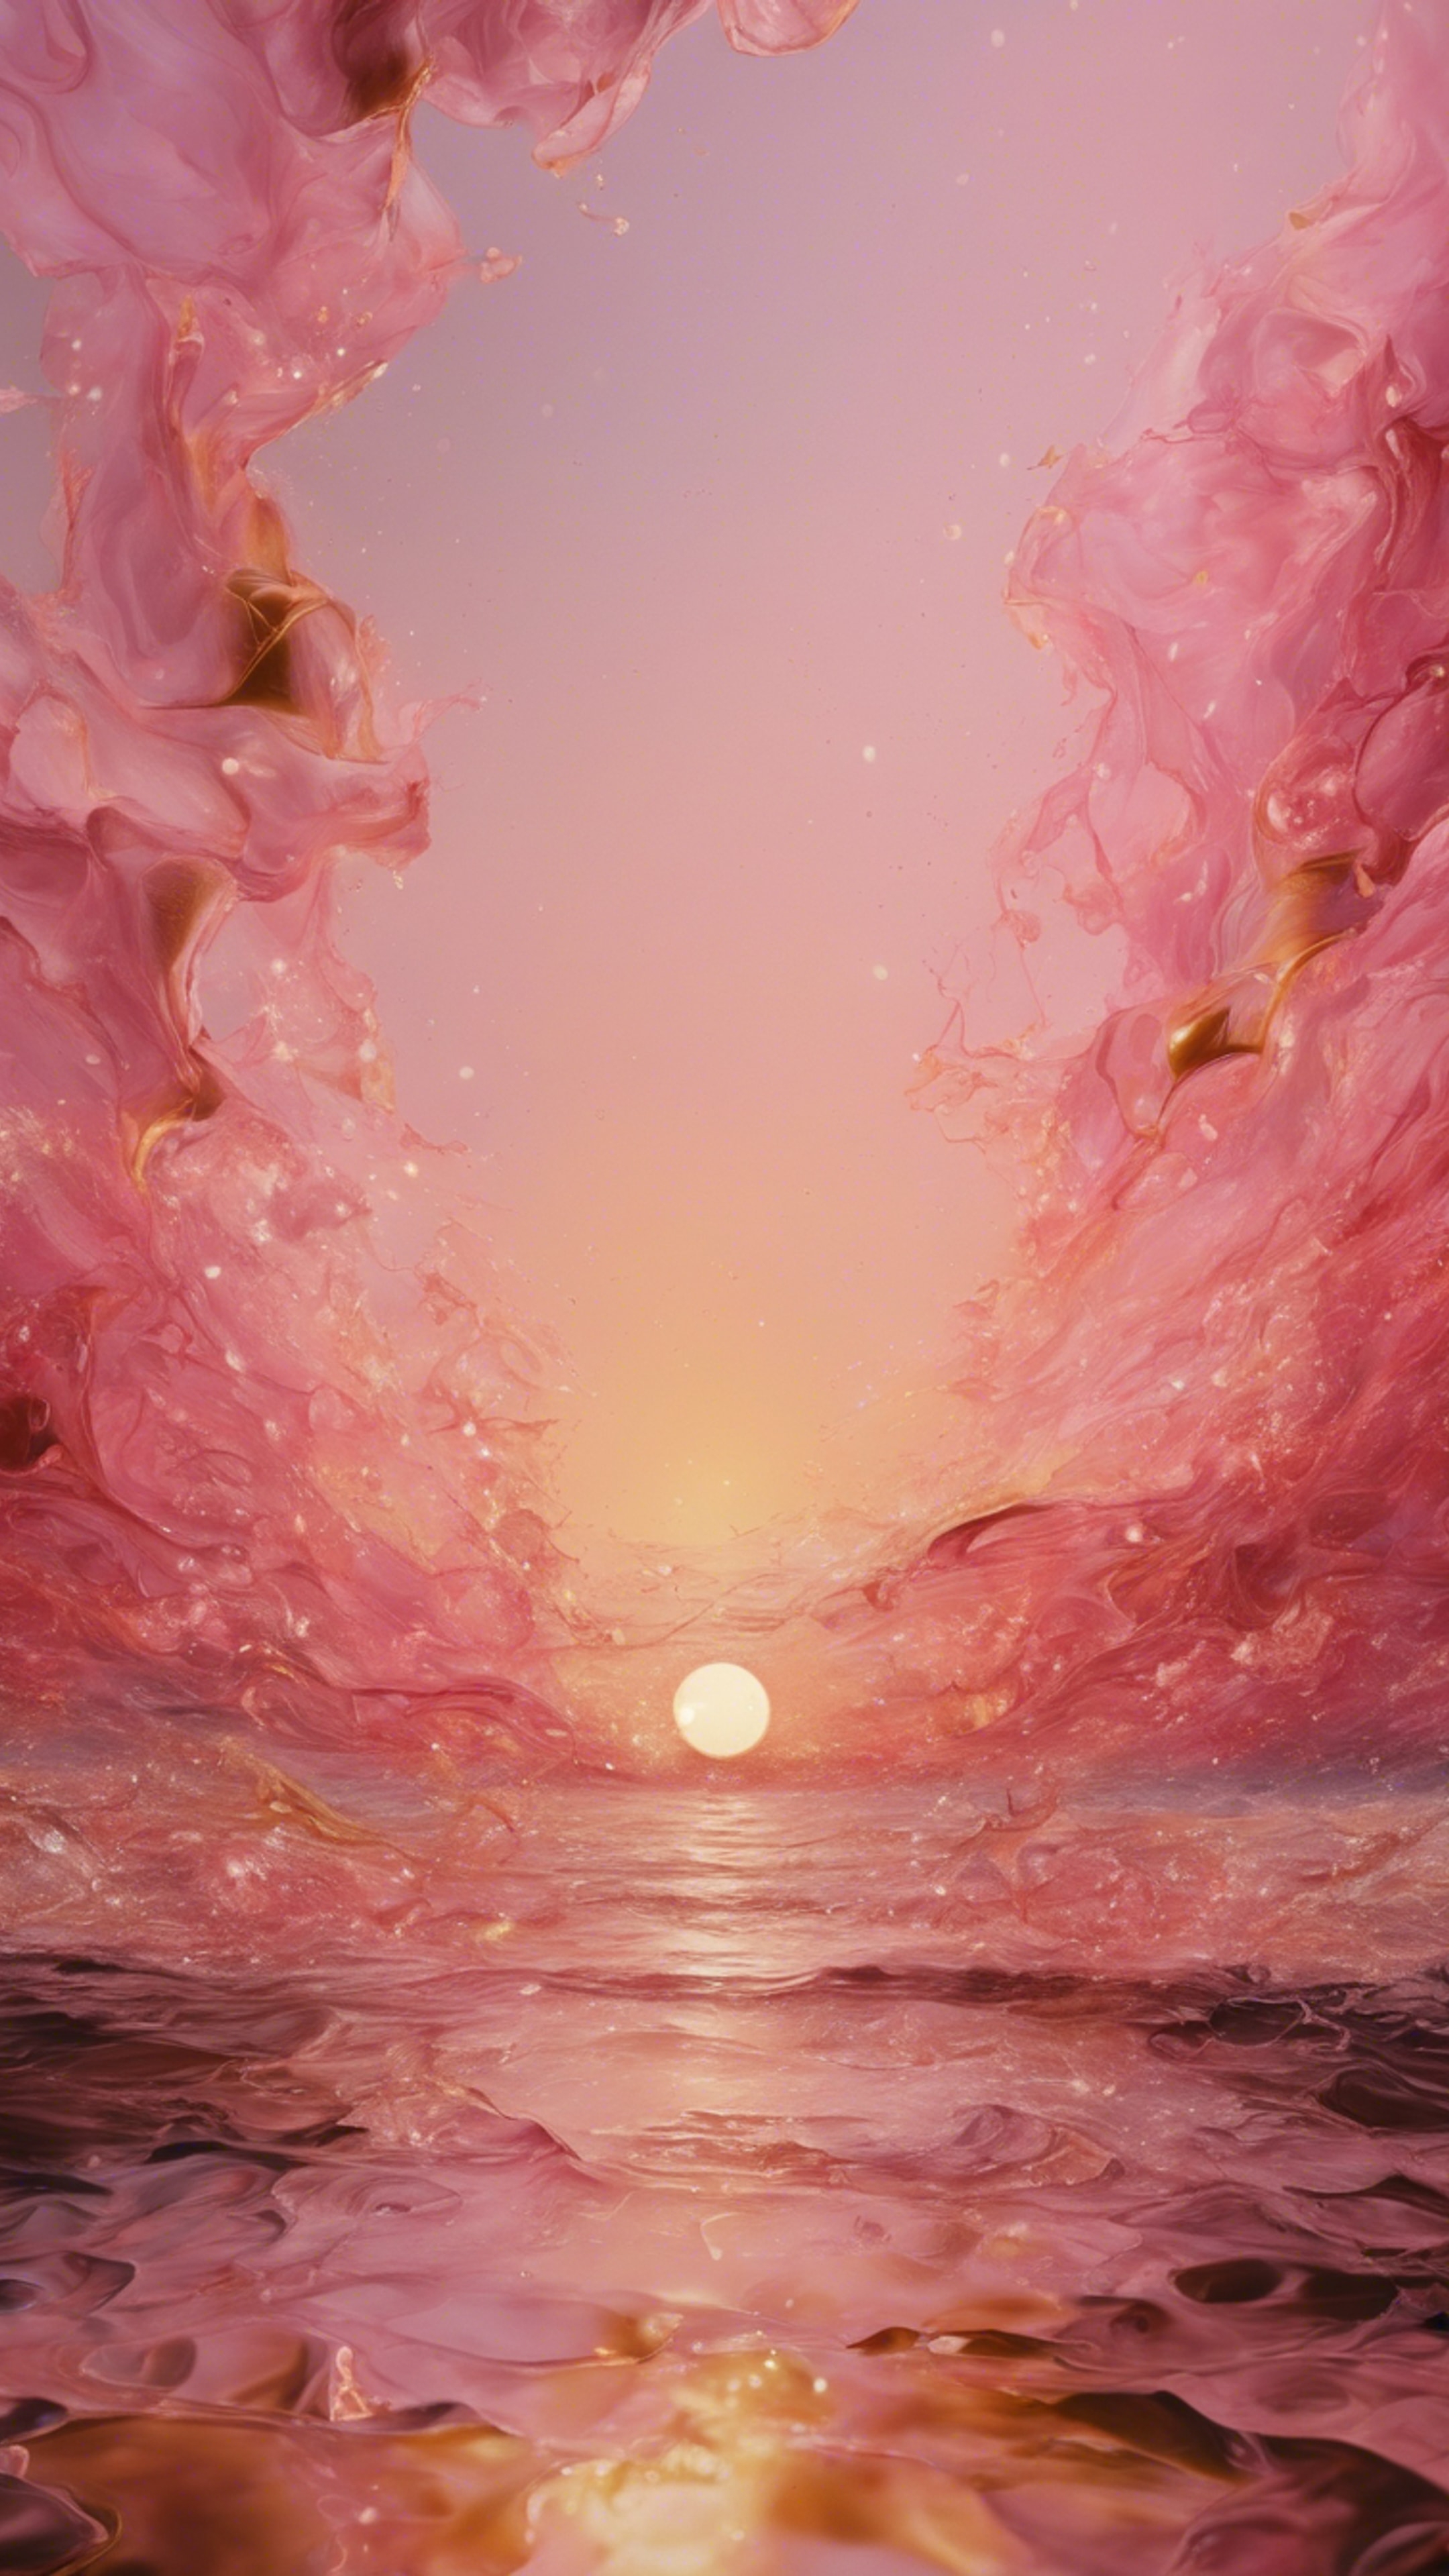 An abstract painting depicting a fusion of rose pink and gold, creating a sunset.壁紙[c07a48b6857e4311b231]